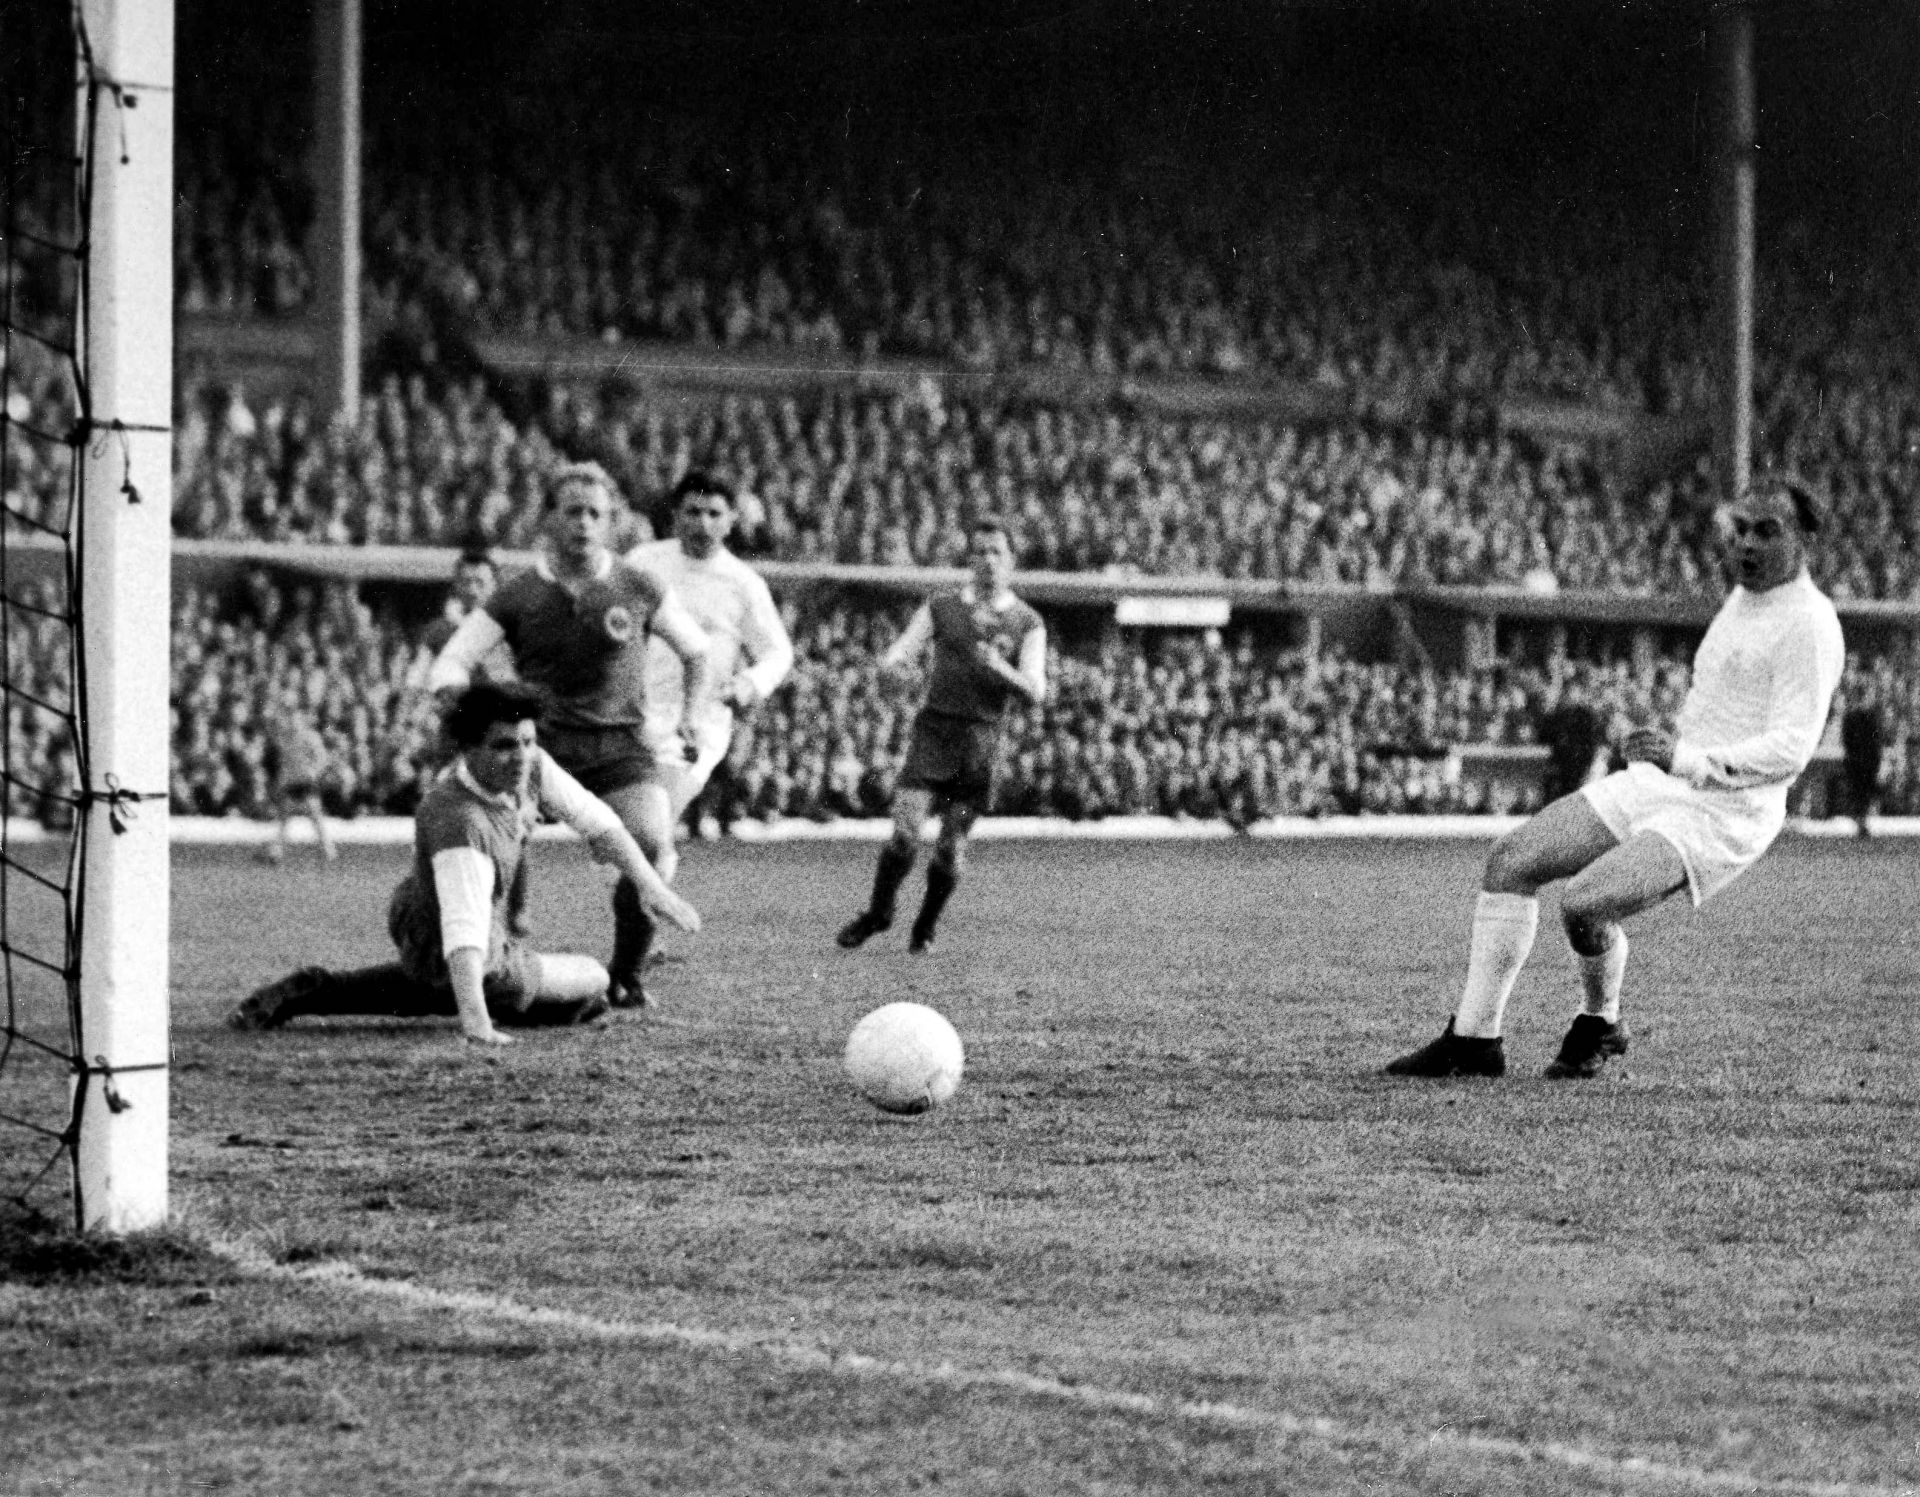 Puskas is the only player to score two hat-tricks in European Cup finals. (Image courtesy: FIFA)